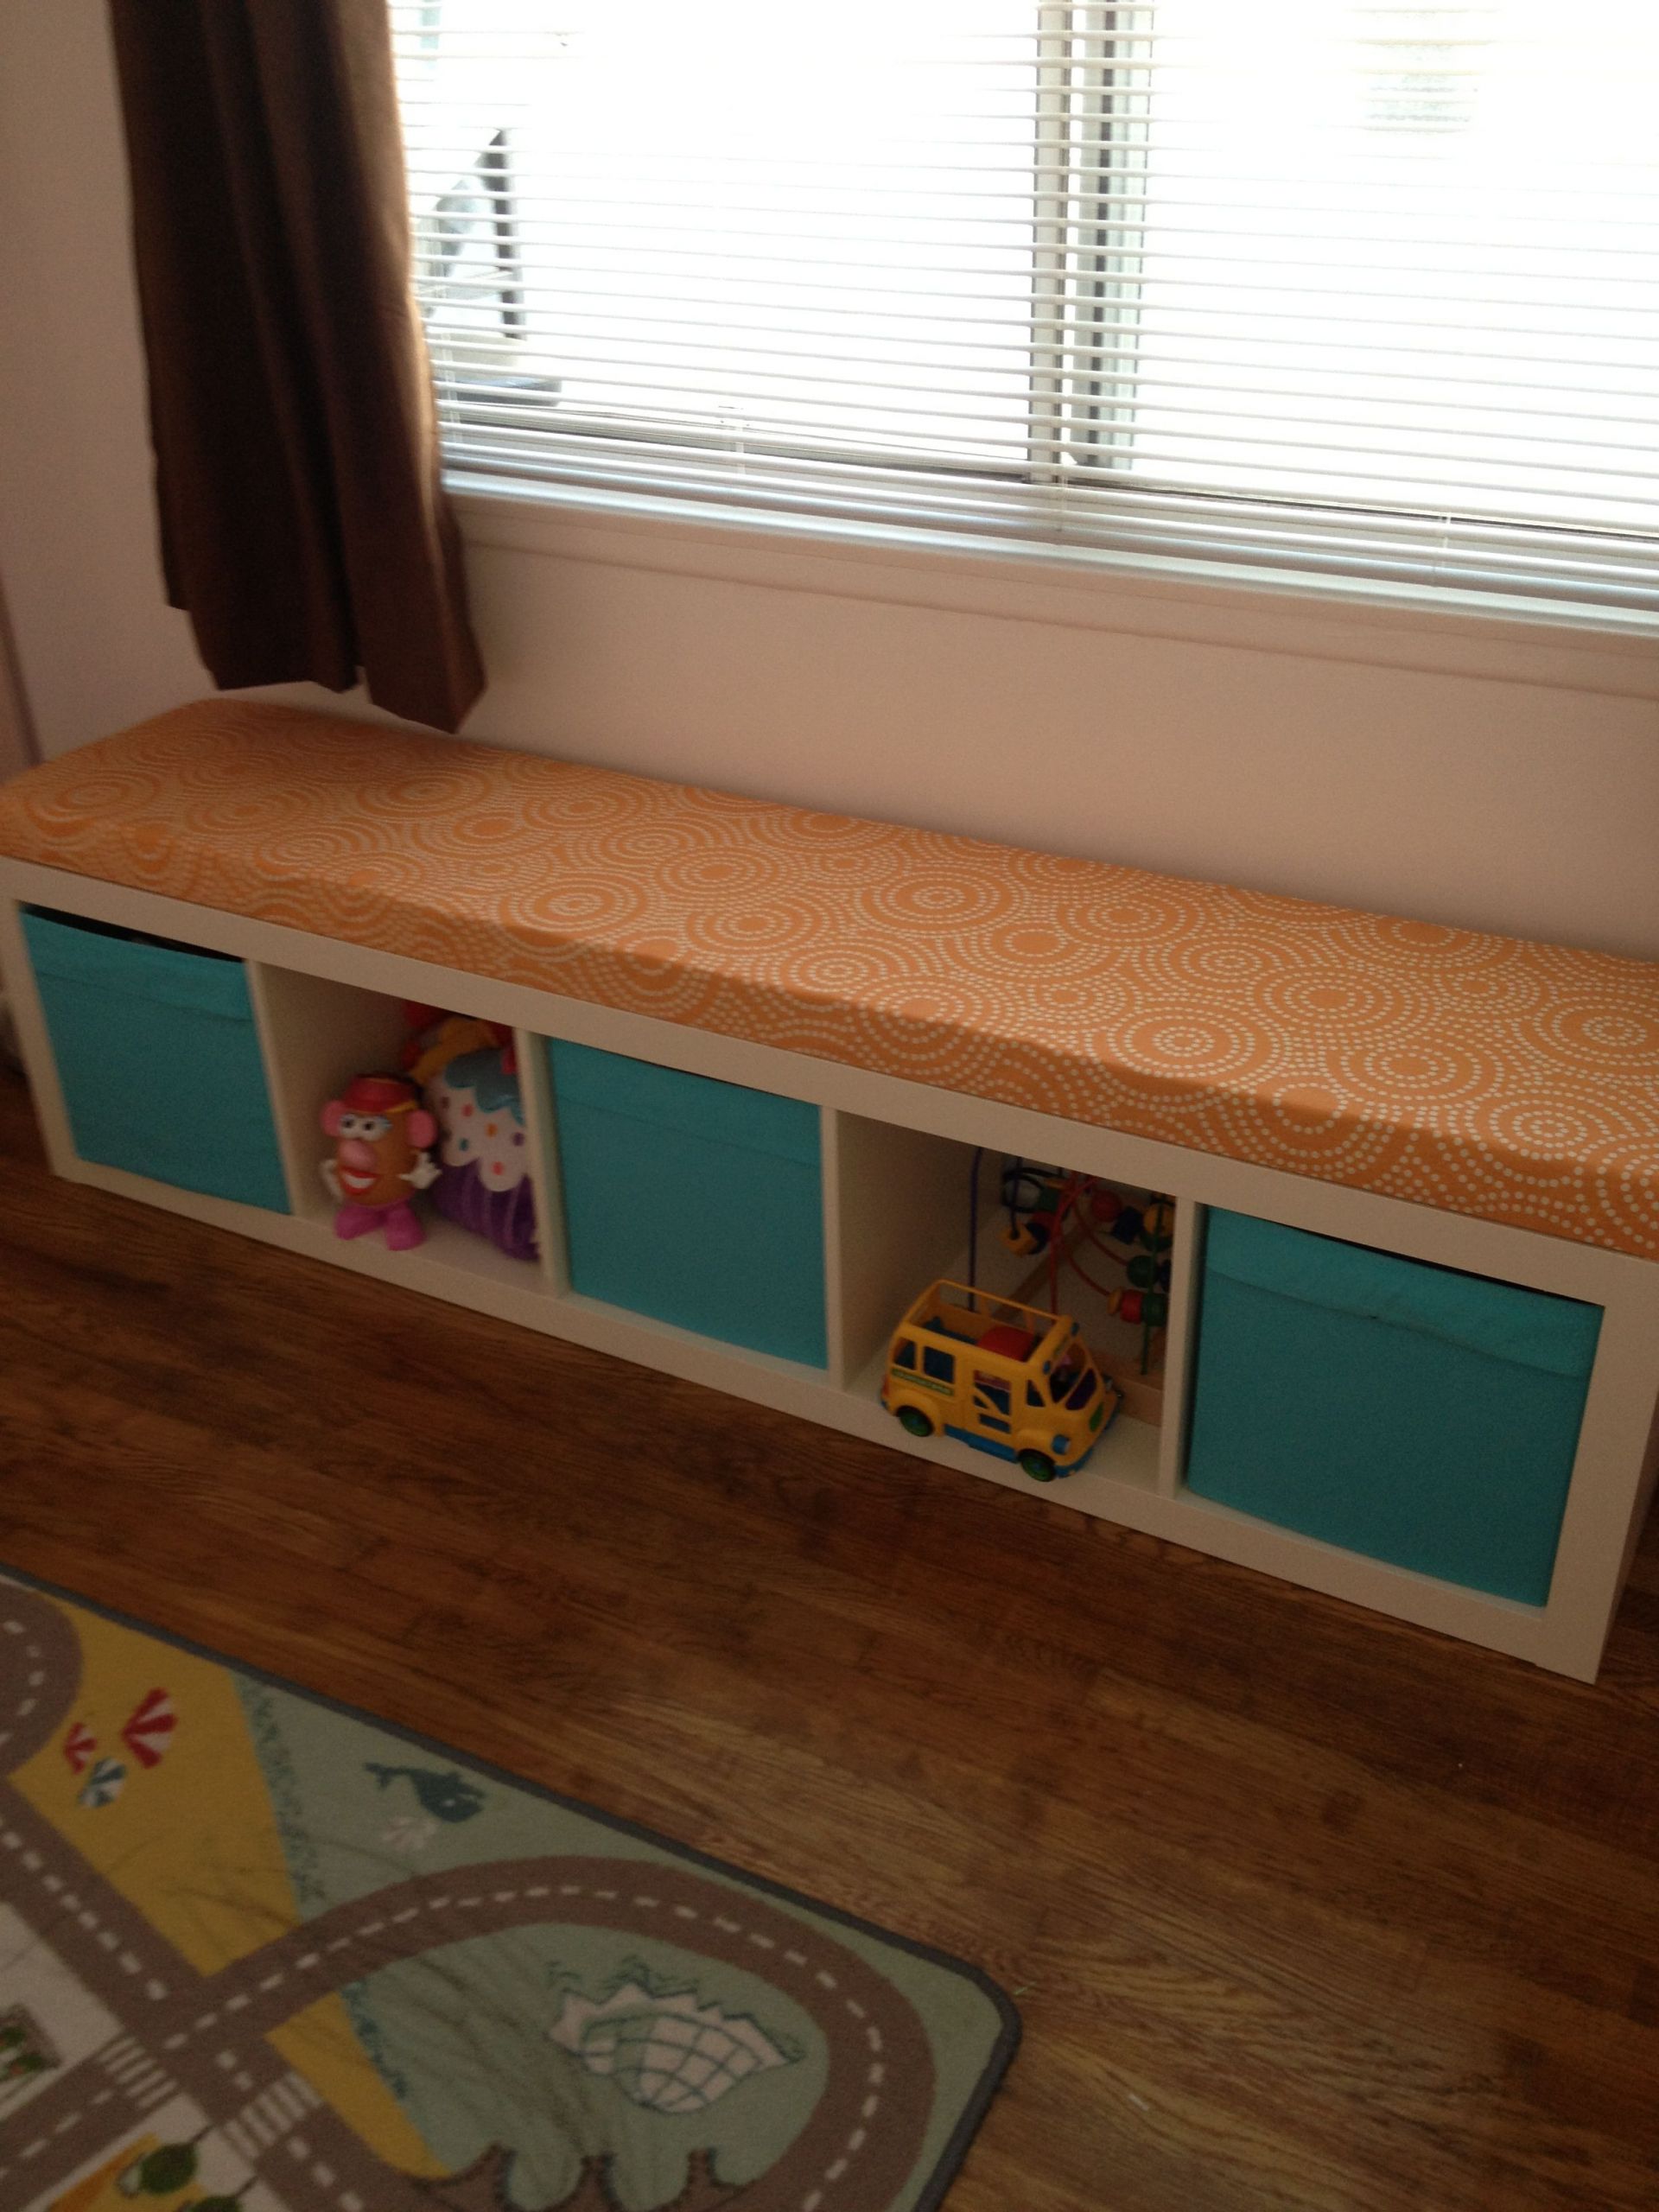 Childrens Storage Bench Seat
 Toddler room toy storage with bench seating DIY